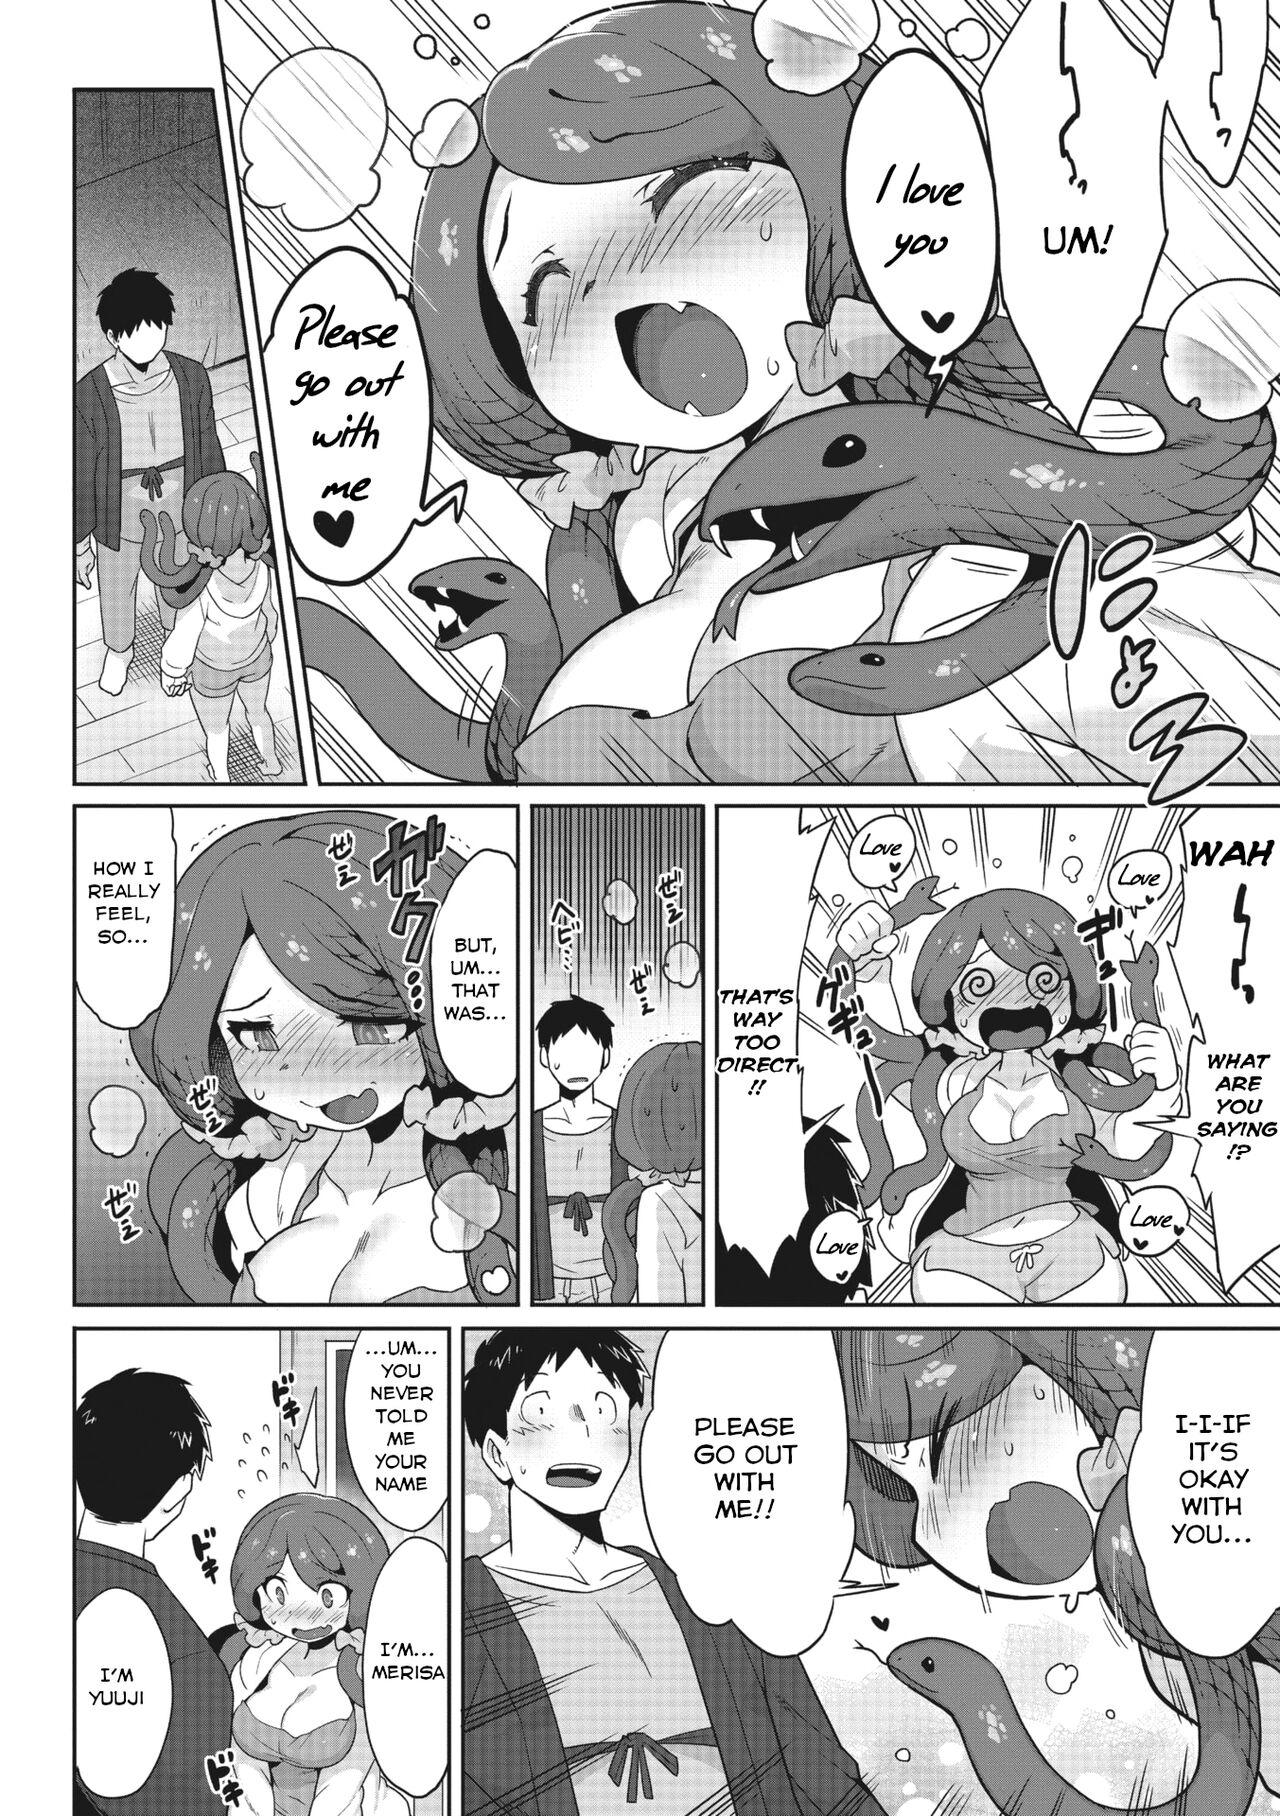 Argentina Mitsumenaide, dakishimete. | Don't look, just hold me. Best Blowjobs - Page 8